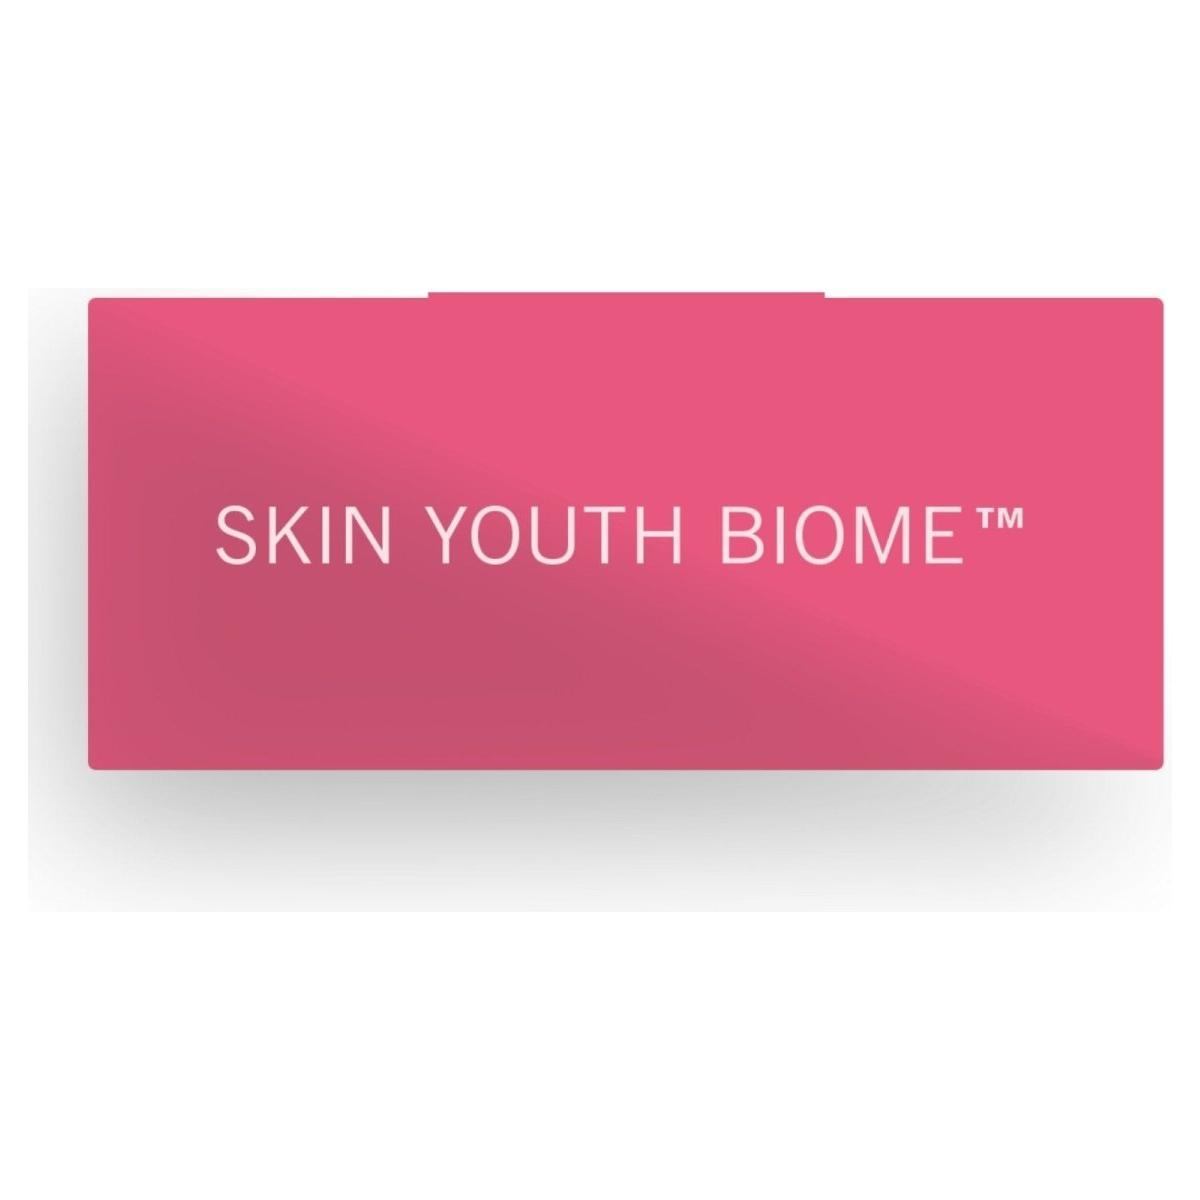 Advanced Nutrition Programme | Skin Youth Biome | 60 caps - DG International Ventures Limited